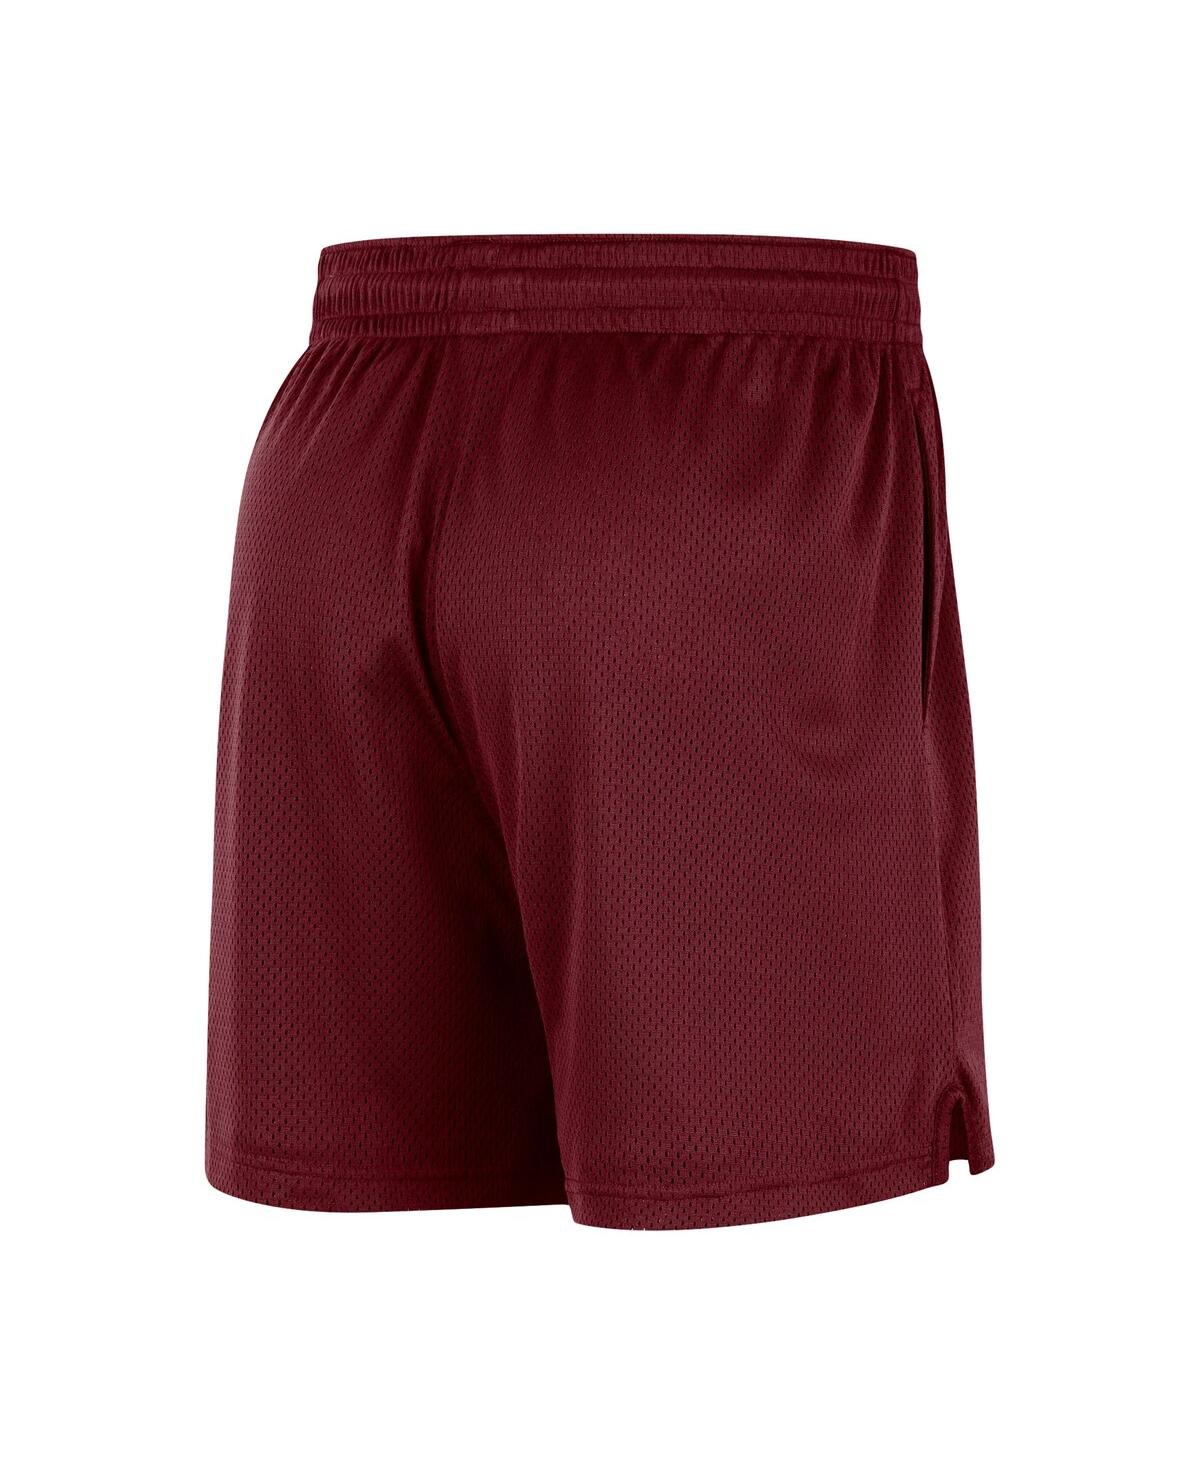 Shop Nike Men's And Women's  Wine Cleveland Cavaliers Warm Up Performance Practice Shorts